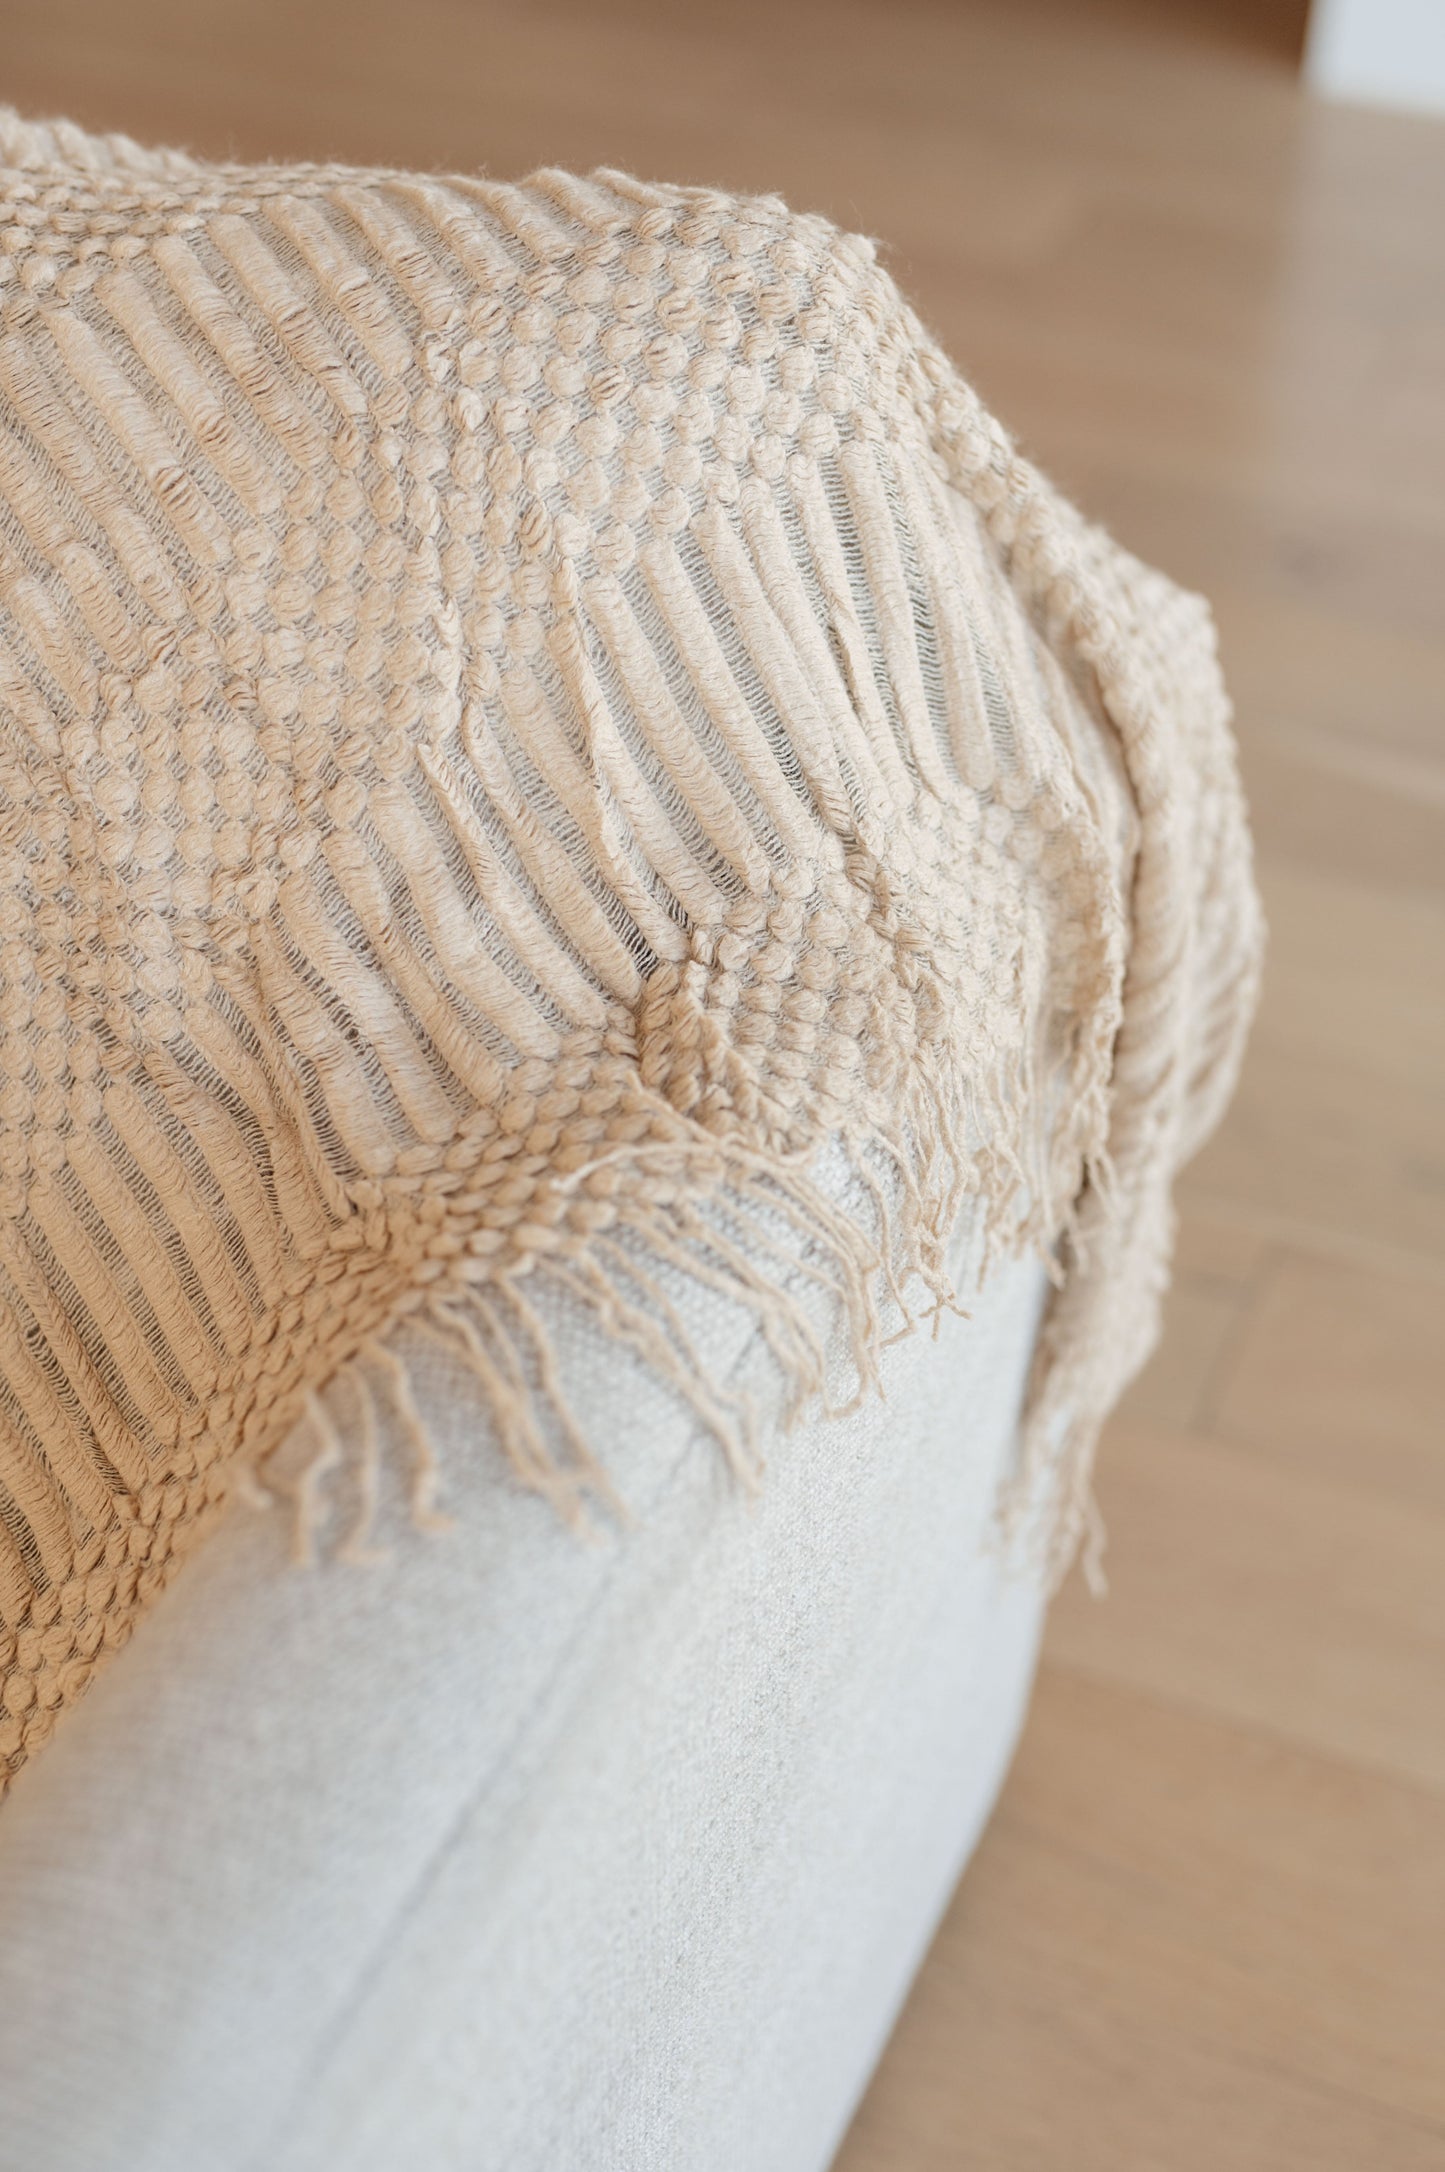 Step into a world of luxury with the Graham Throw by Cuddle Culture in Beige. Imagine wrapping yourself in a gentle embrace after a long day, enveloped in its soft, lightweight fibers. Crafted with care, the Graham blanket is the perfect companion for your cuddle sessions or chilly movie nights. 